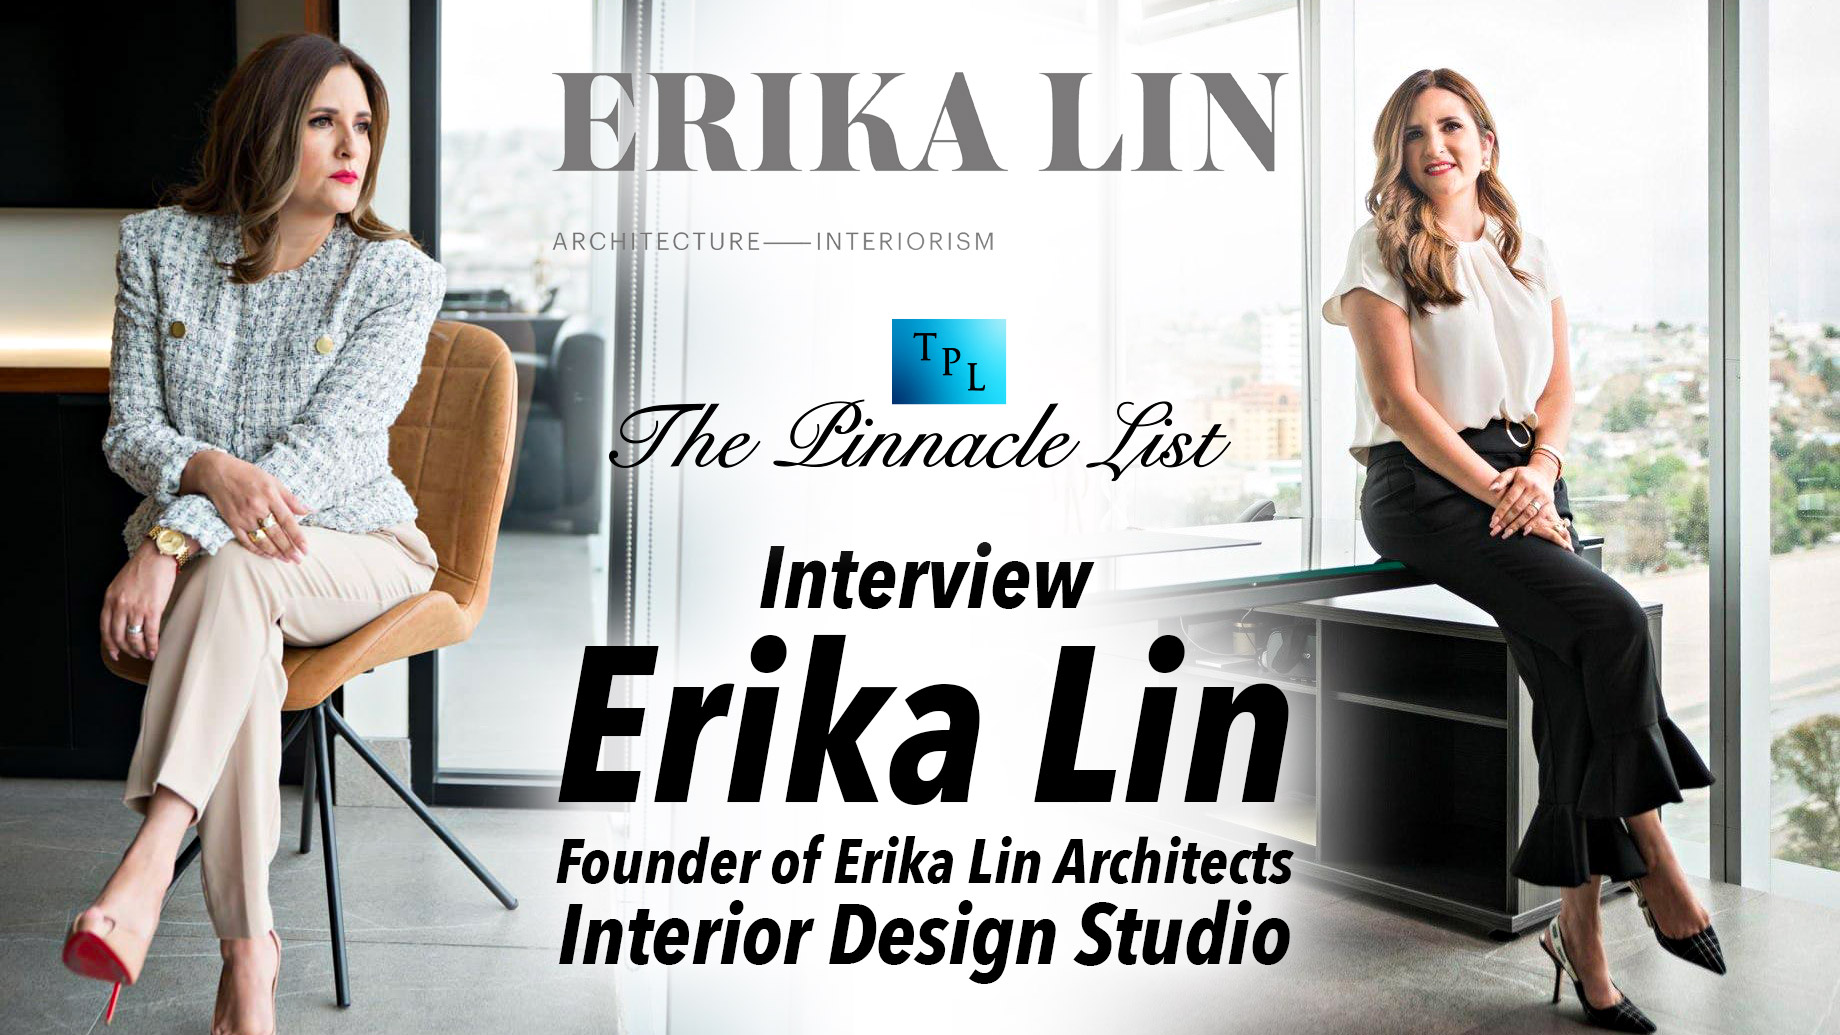 Interview with Erika Lin, Founder of Erika Lin Architecture and Interior Design Studio